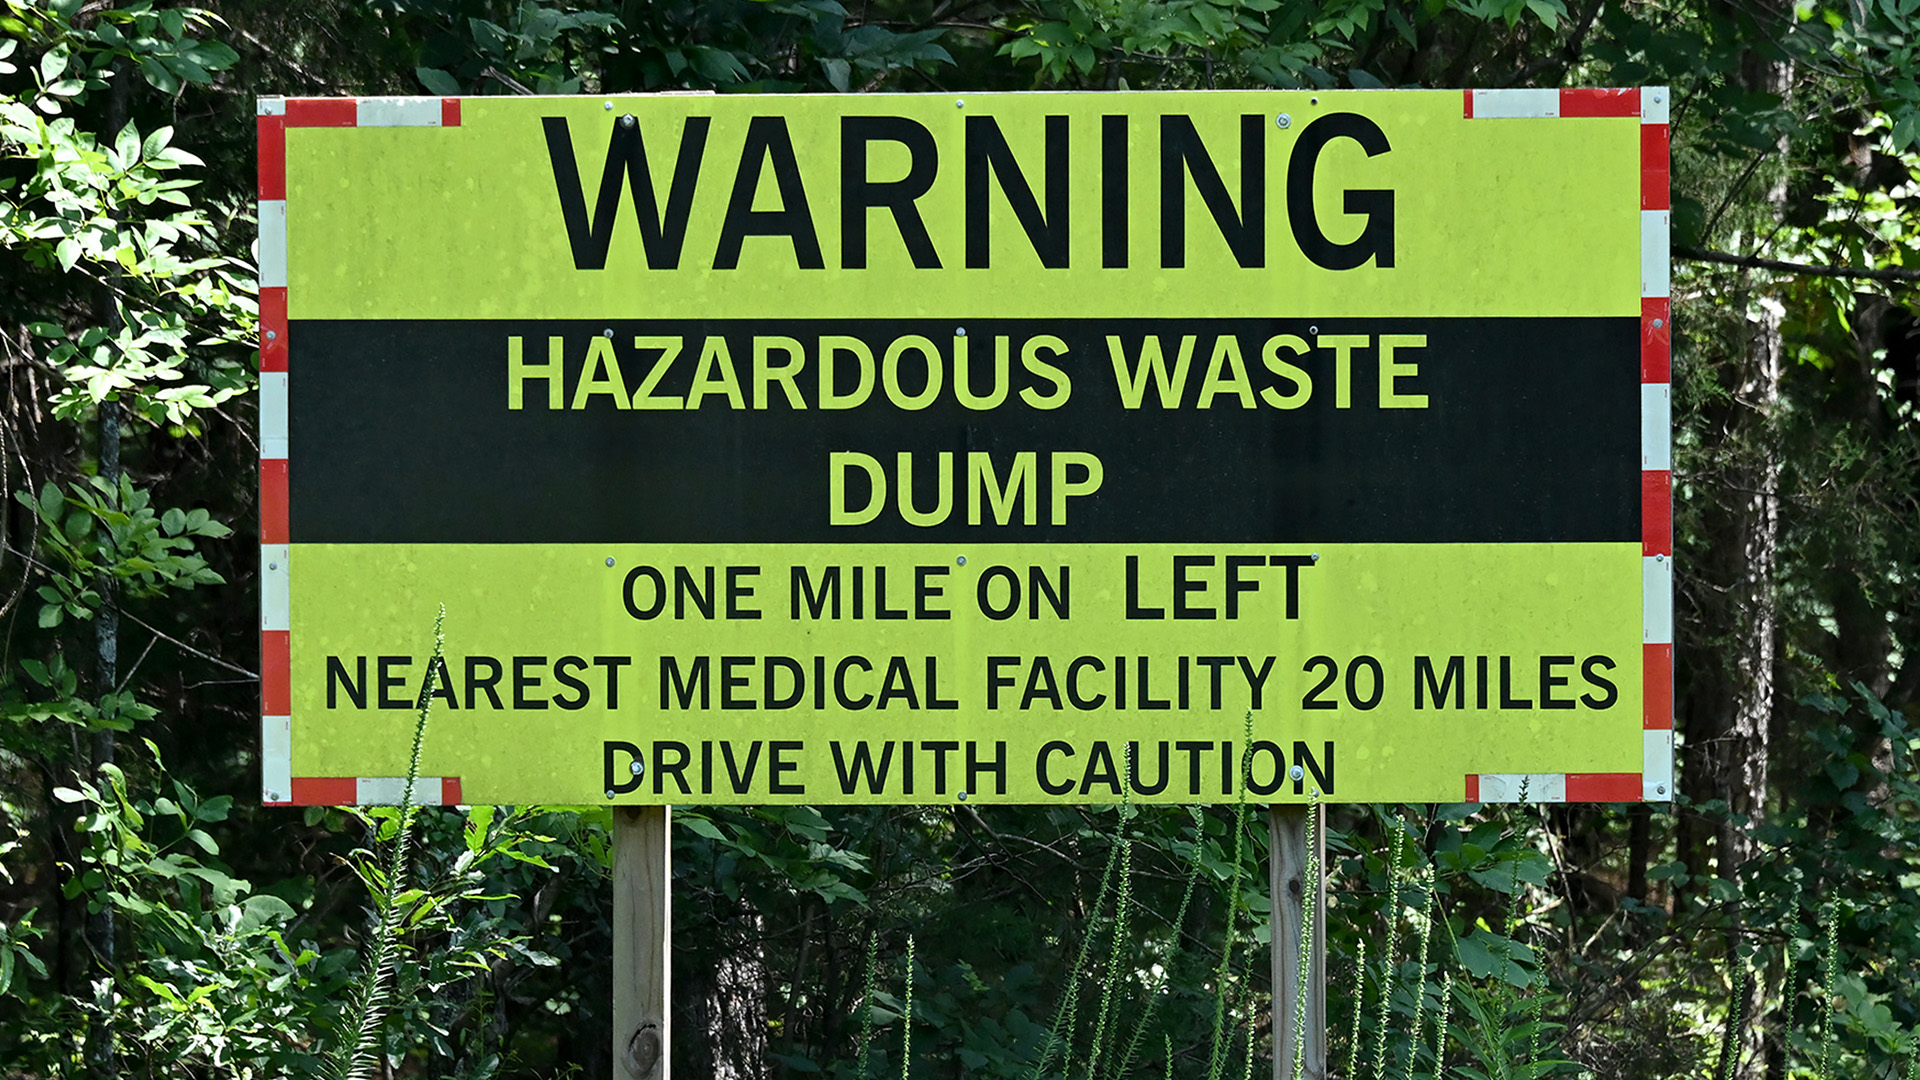 A sign with the words "Warning," "Hazardous Waste Dump," One Mile on Left," "Nearest Medical Facility 20 Miles," and "Drive With Caution" stands in front of trees and ground foliage.